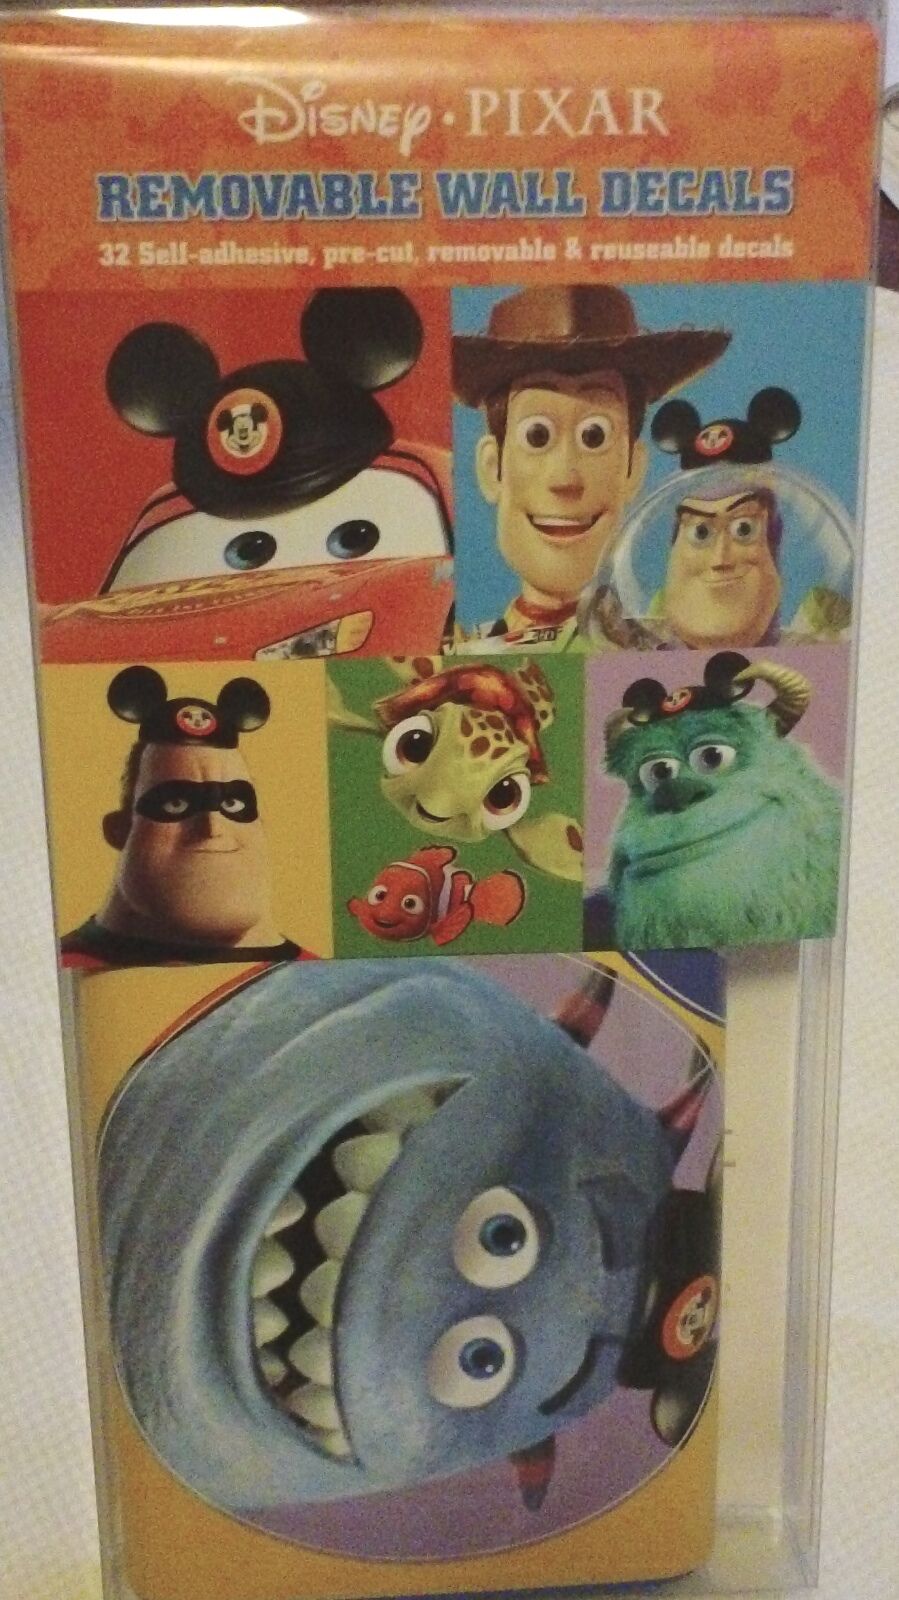 DISNEY PIXAR 32 Removable & Reuseable Wall Decals